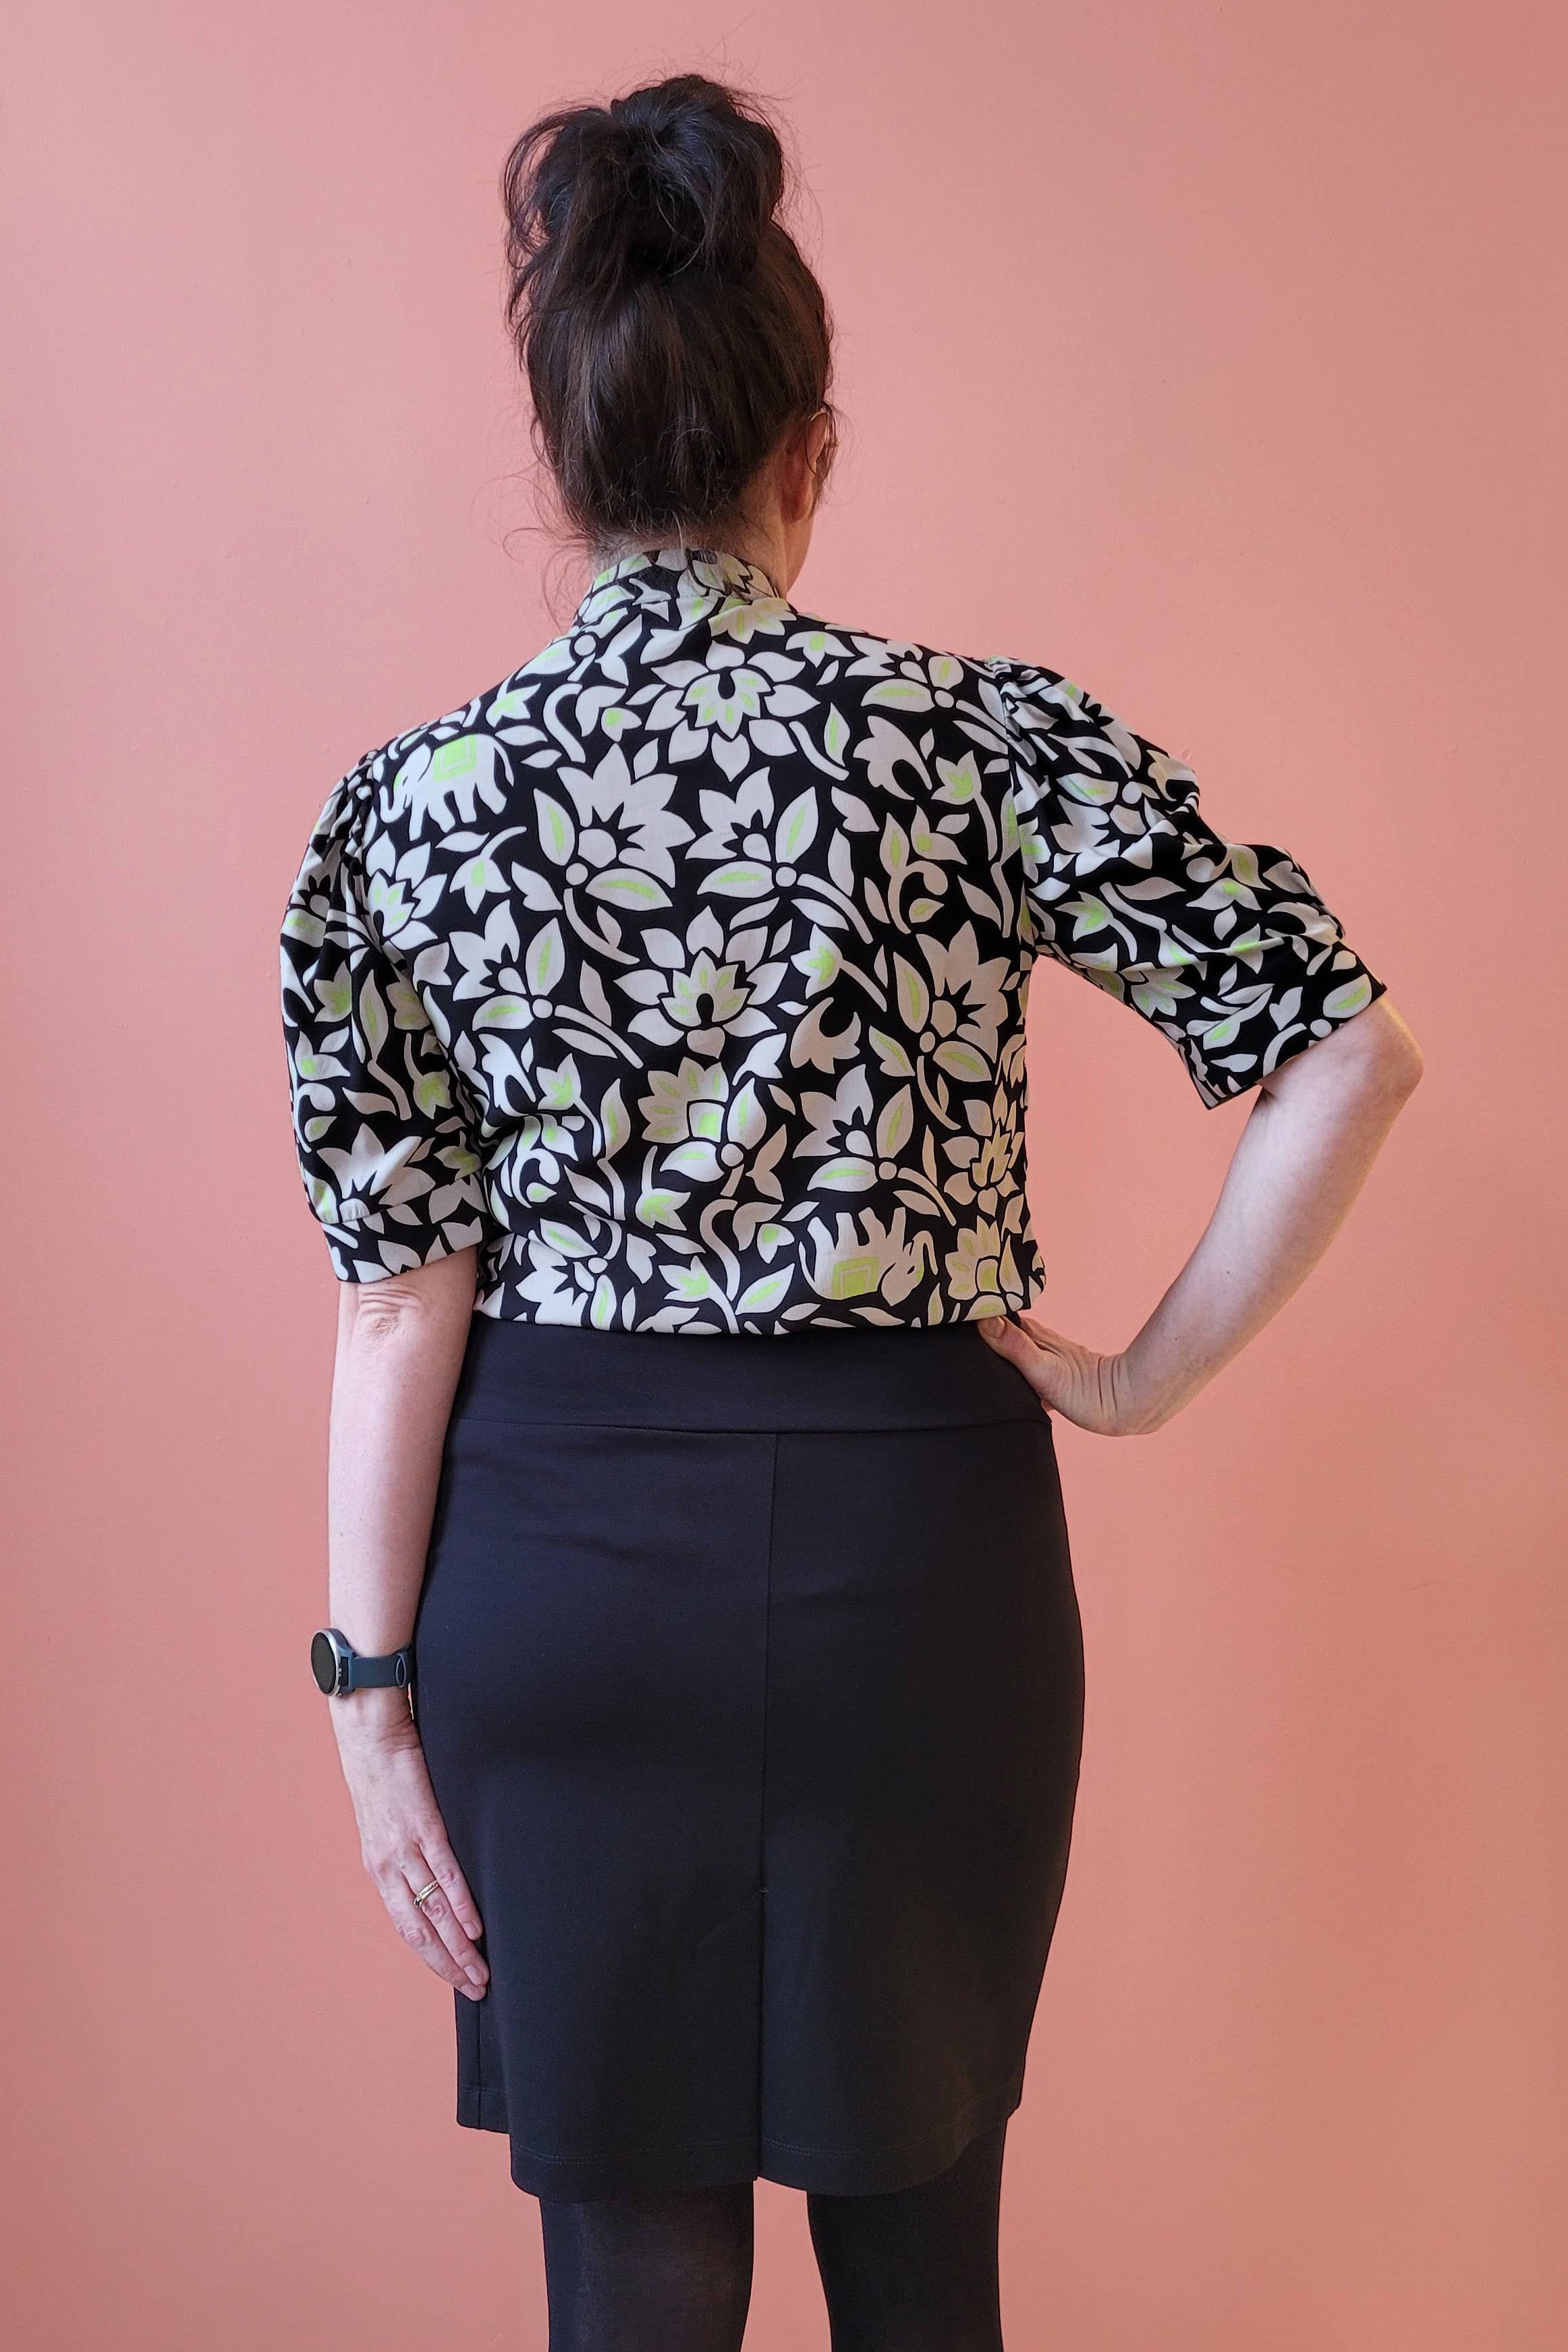 Pema Blouse by Studio D, Green Elephants, back view, black and white pattern with subtle elephants with pops of green, cut out and tie detail at neckline, slightly bloused sleeve with cuff above the elbow, sizes XS to XL ,made in Ottawa